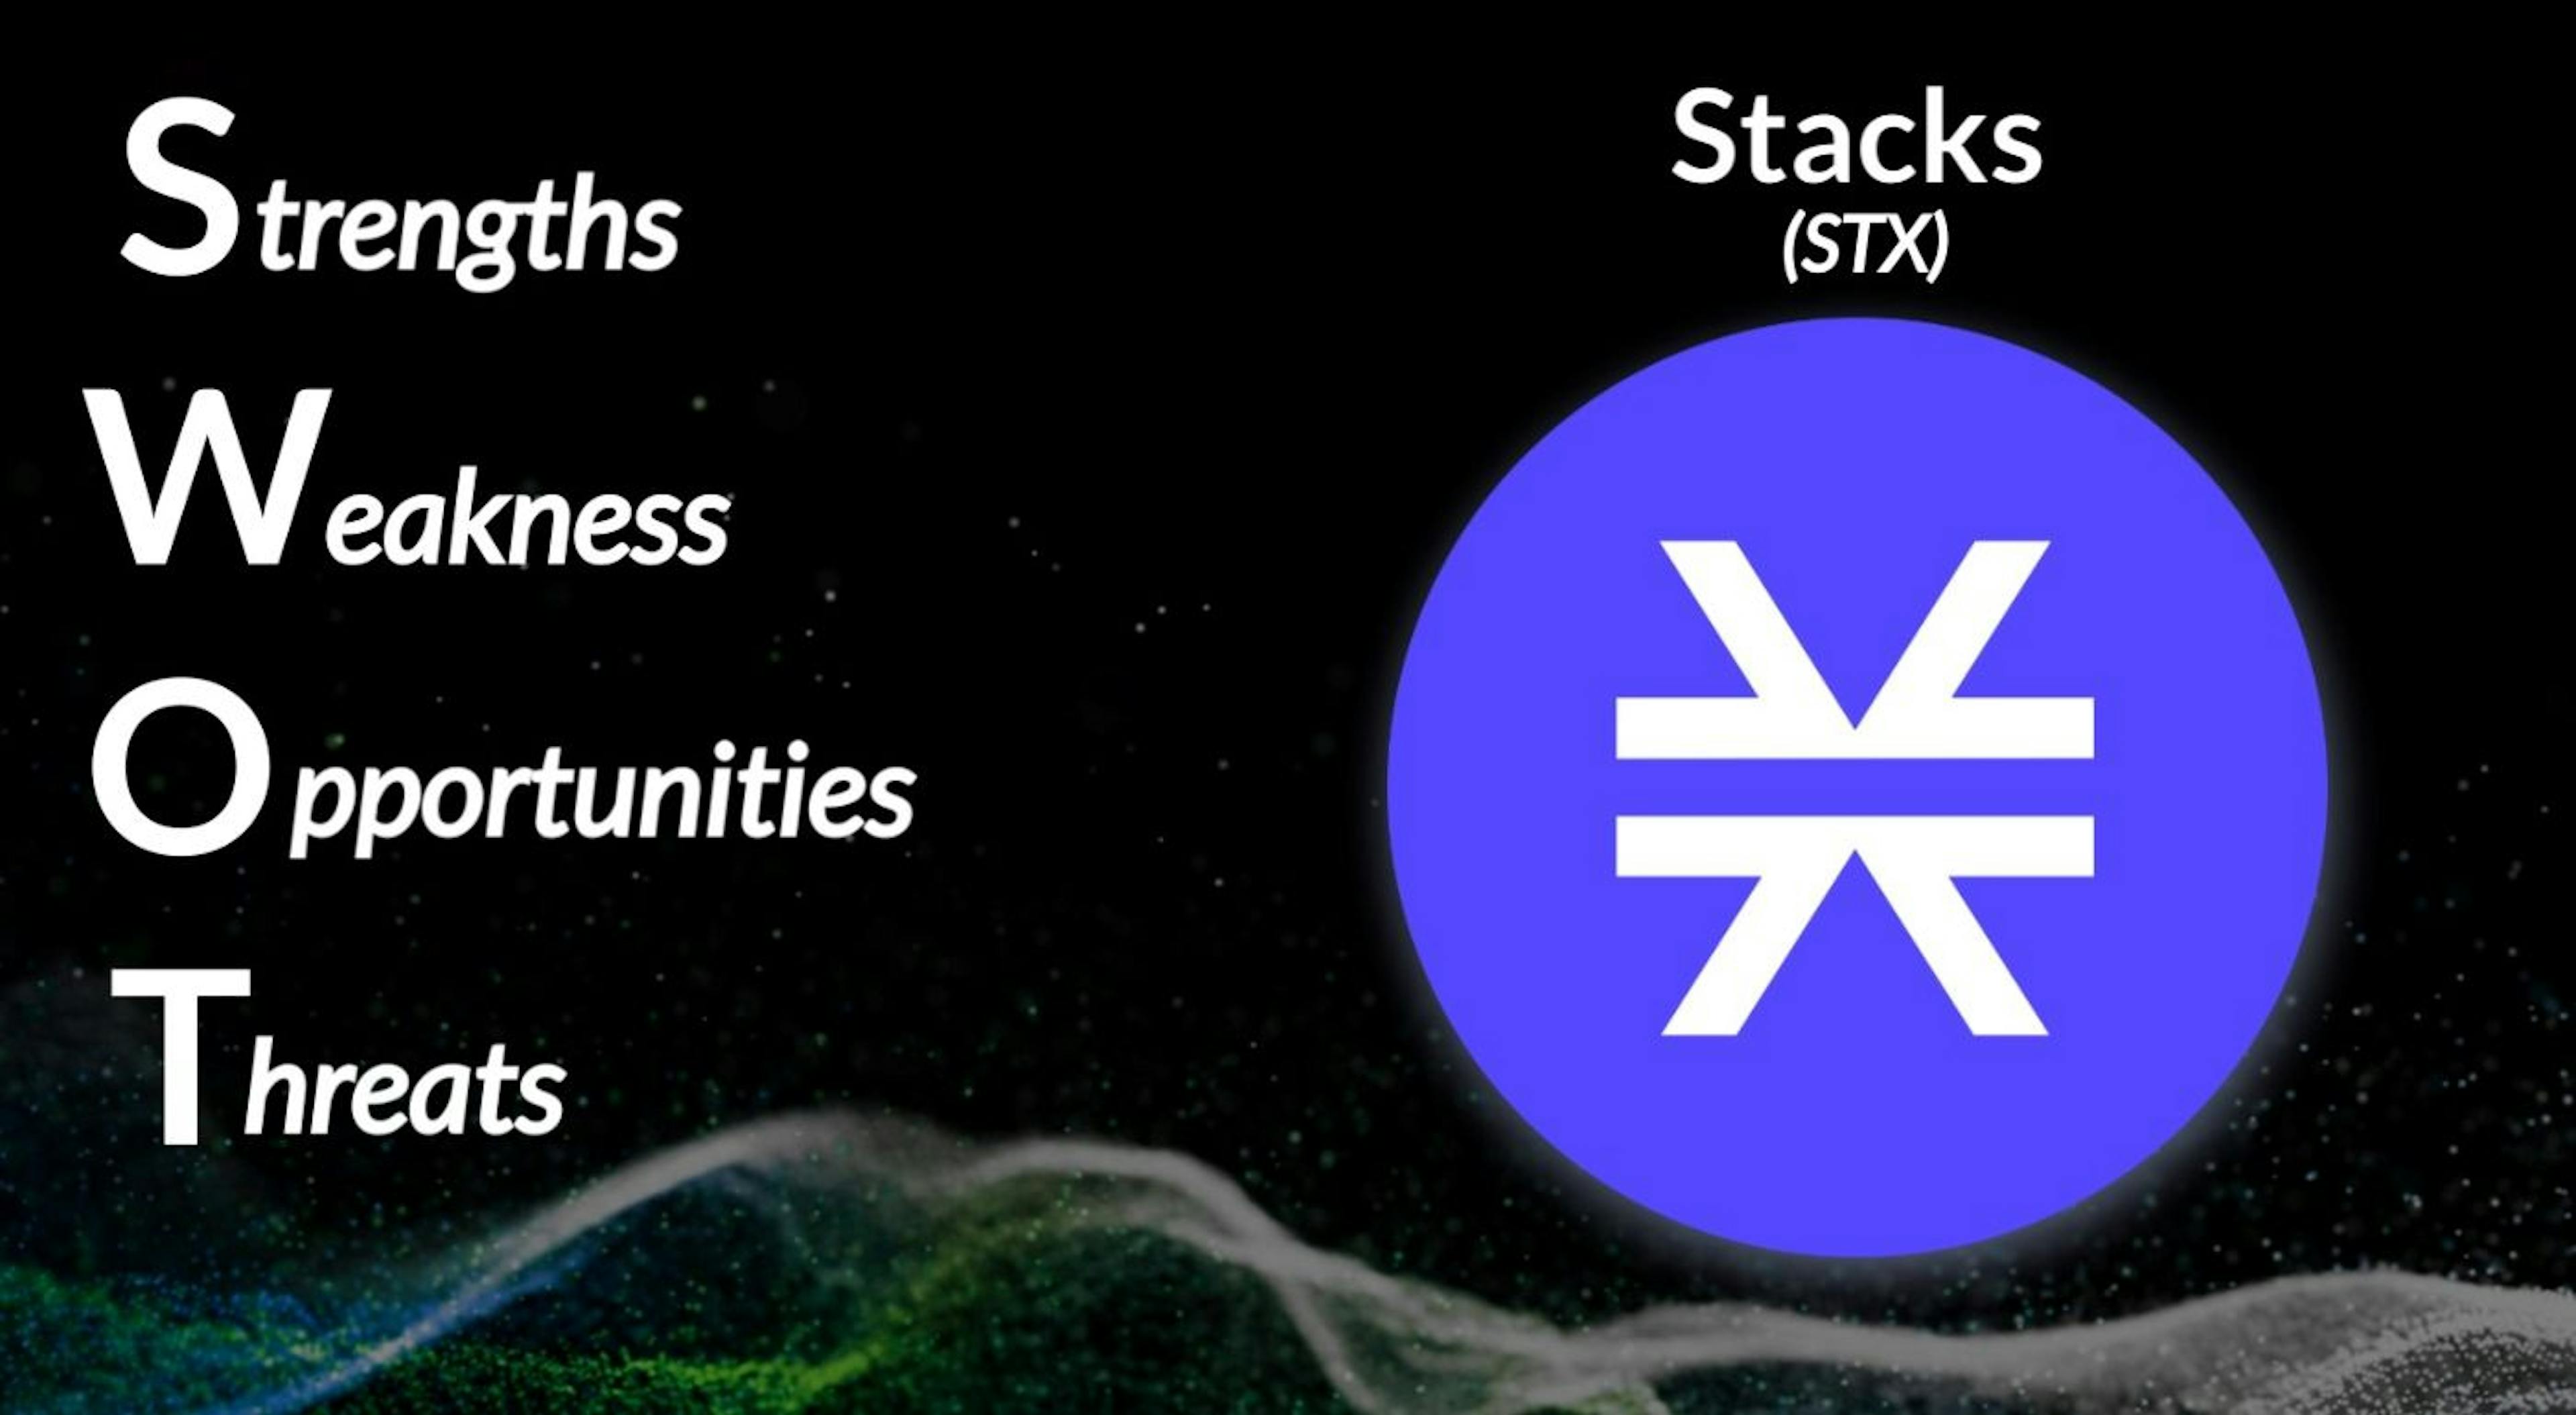 featured image - The Stacks (STX) SWOT Analysis